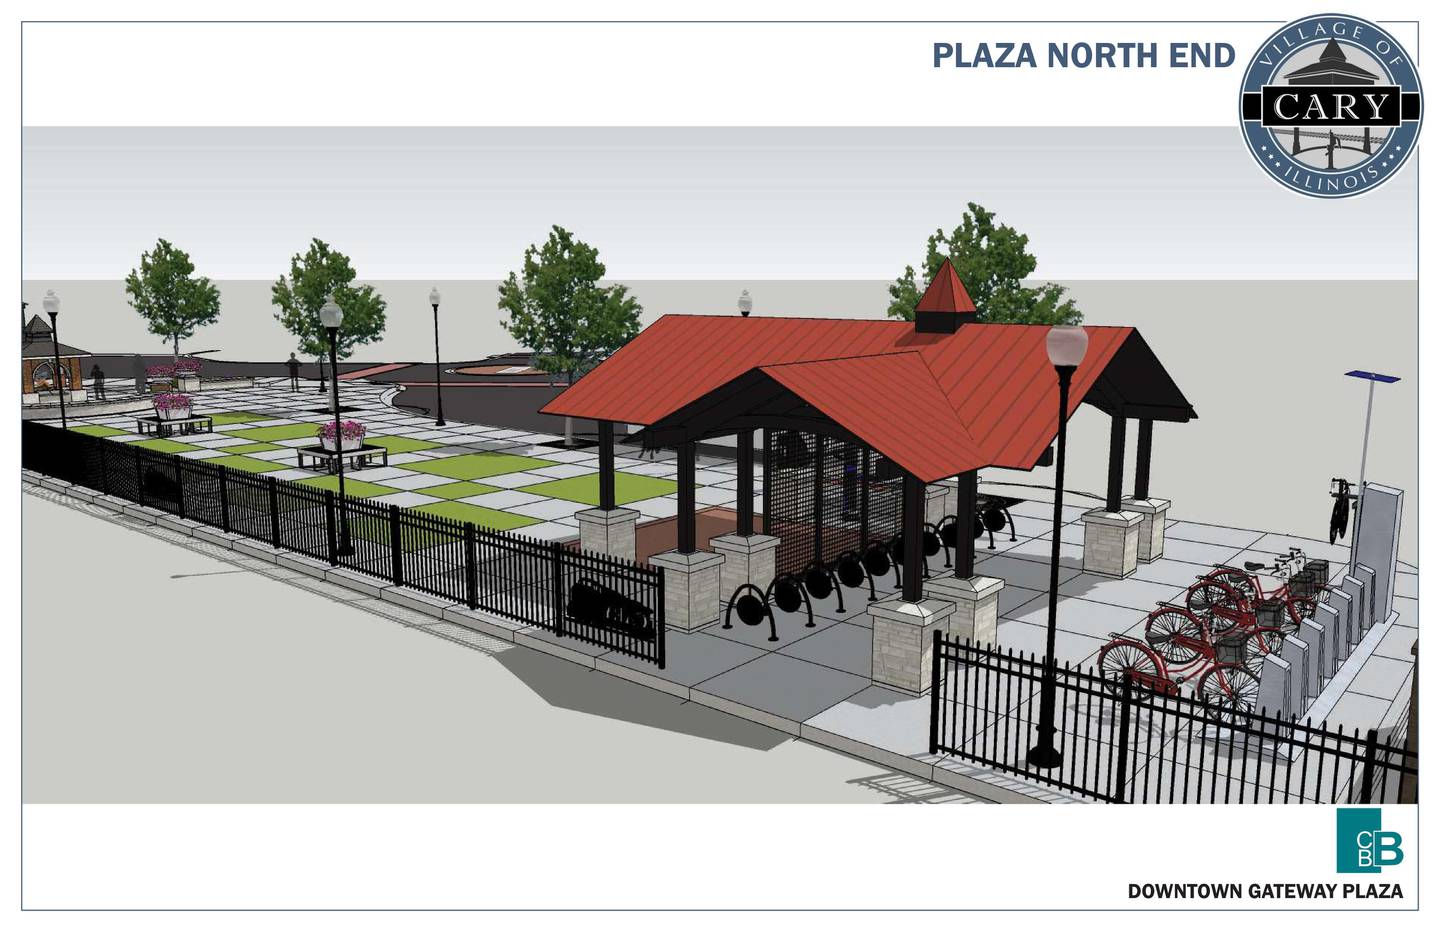 Renderings show a plaza proposed for near the Metra commuter station in downtown Cary.